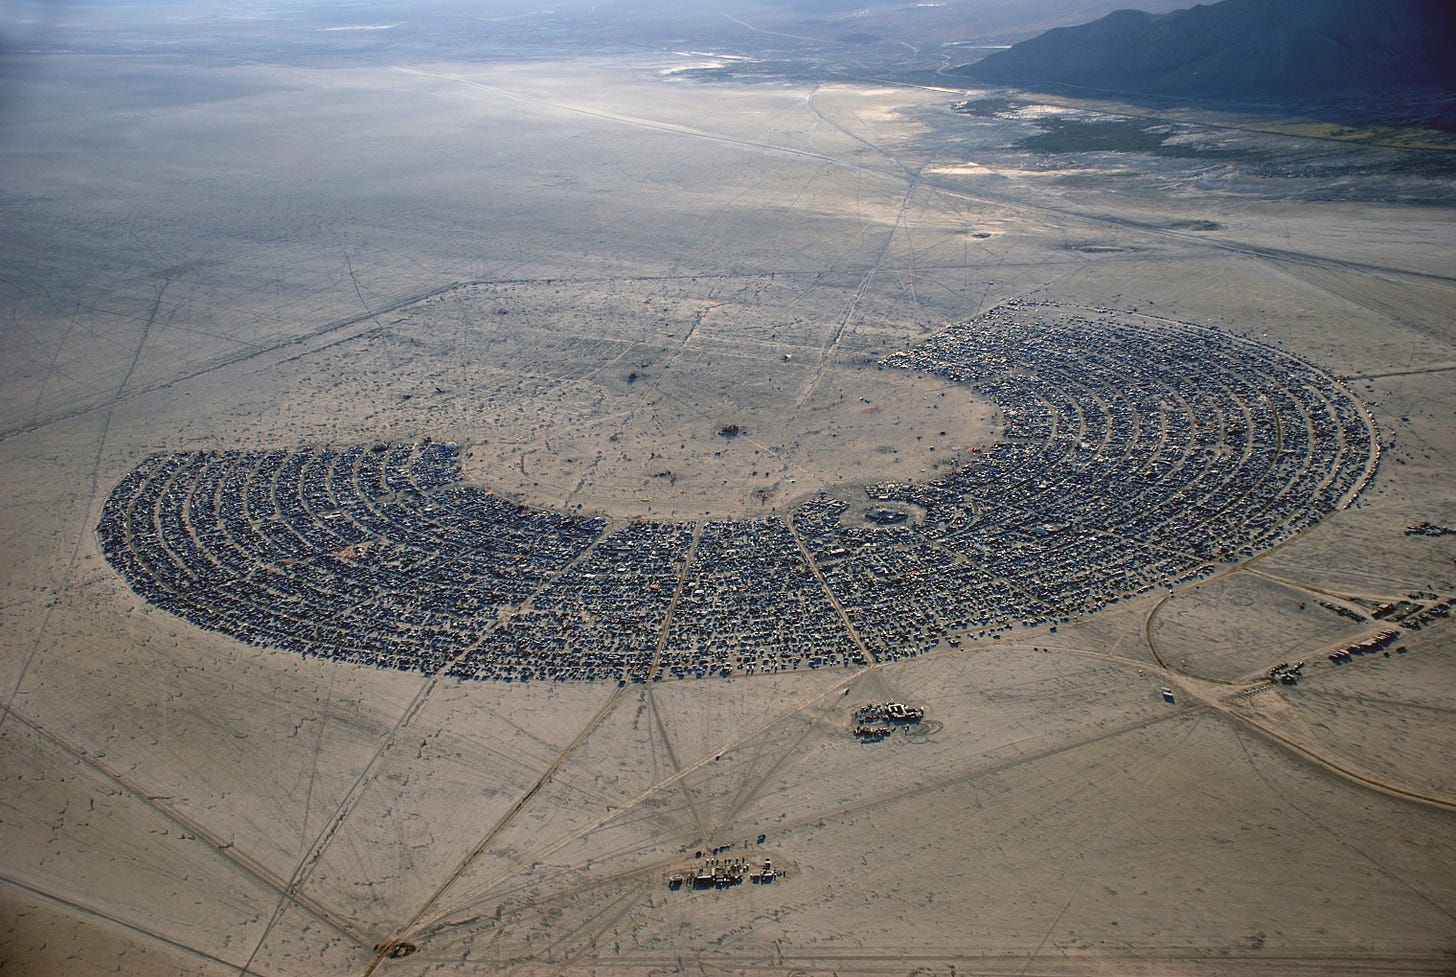 A Man Who Has Attended Burning Man for Decades Captured the ...